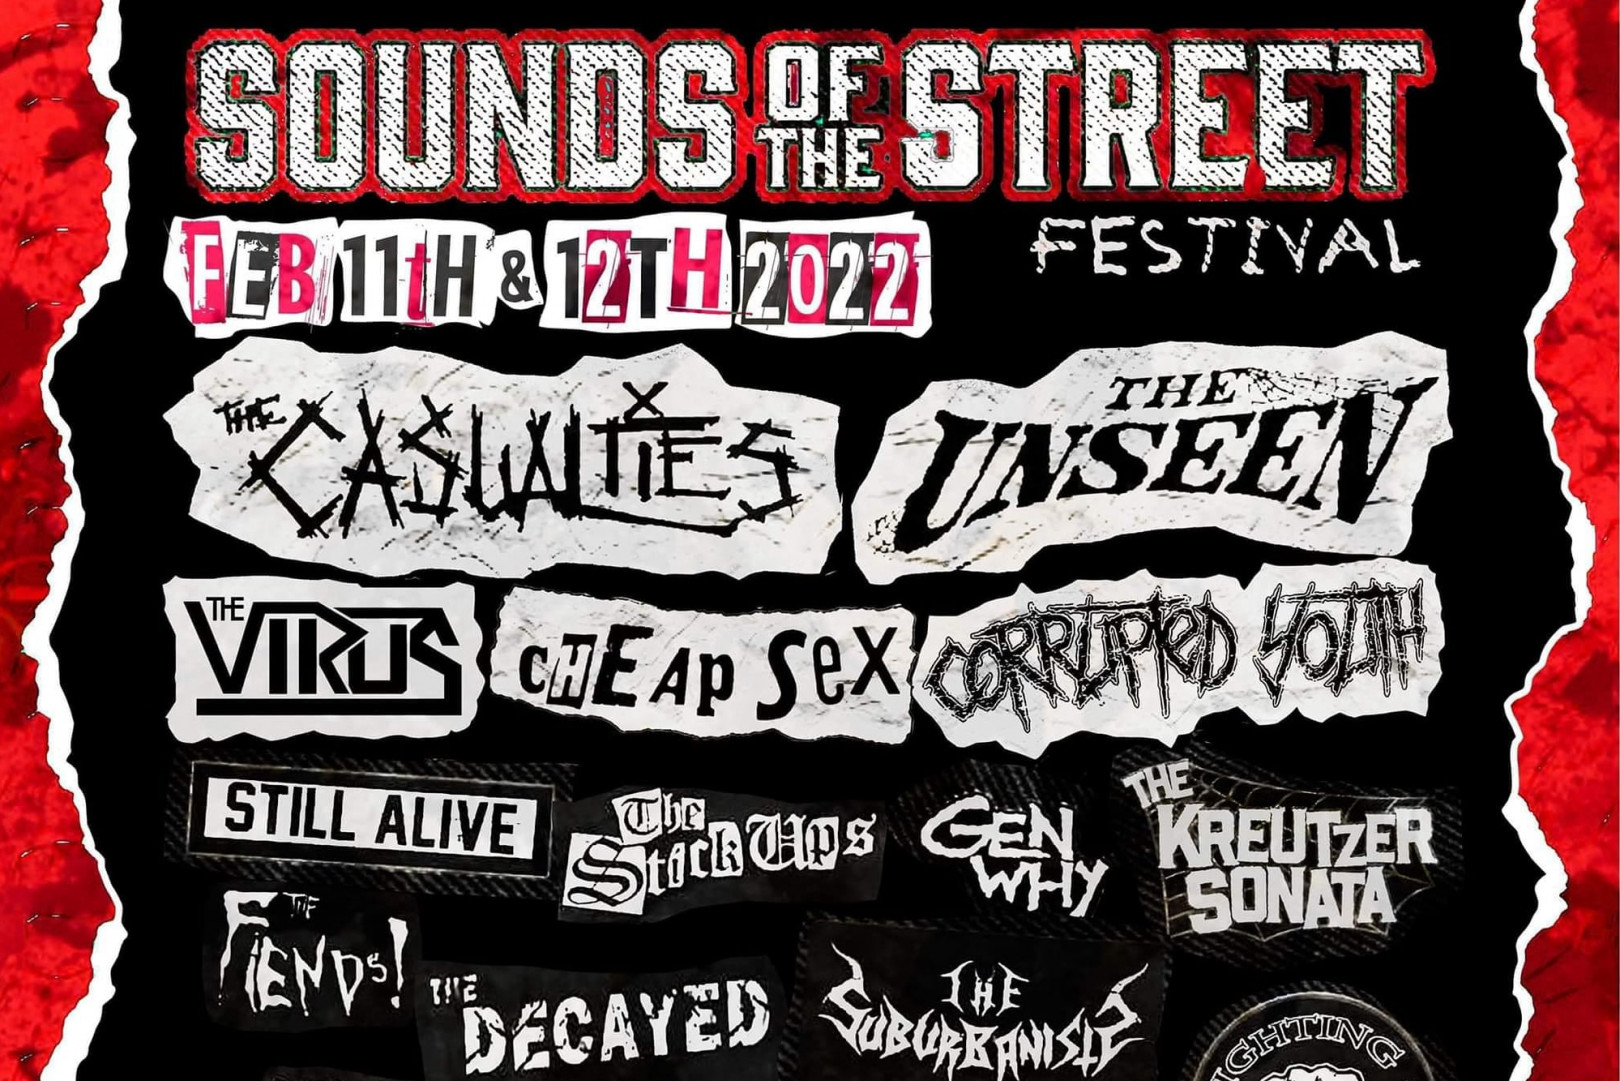 Unseen, Cheap Sex, The Casualties to Play Sounds of the Street Festival